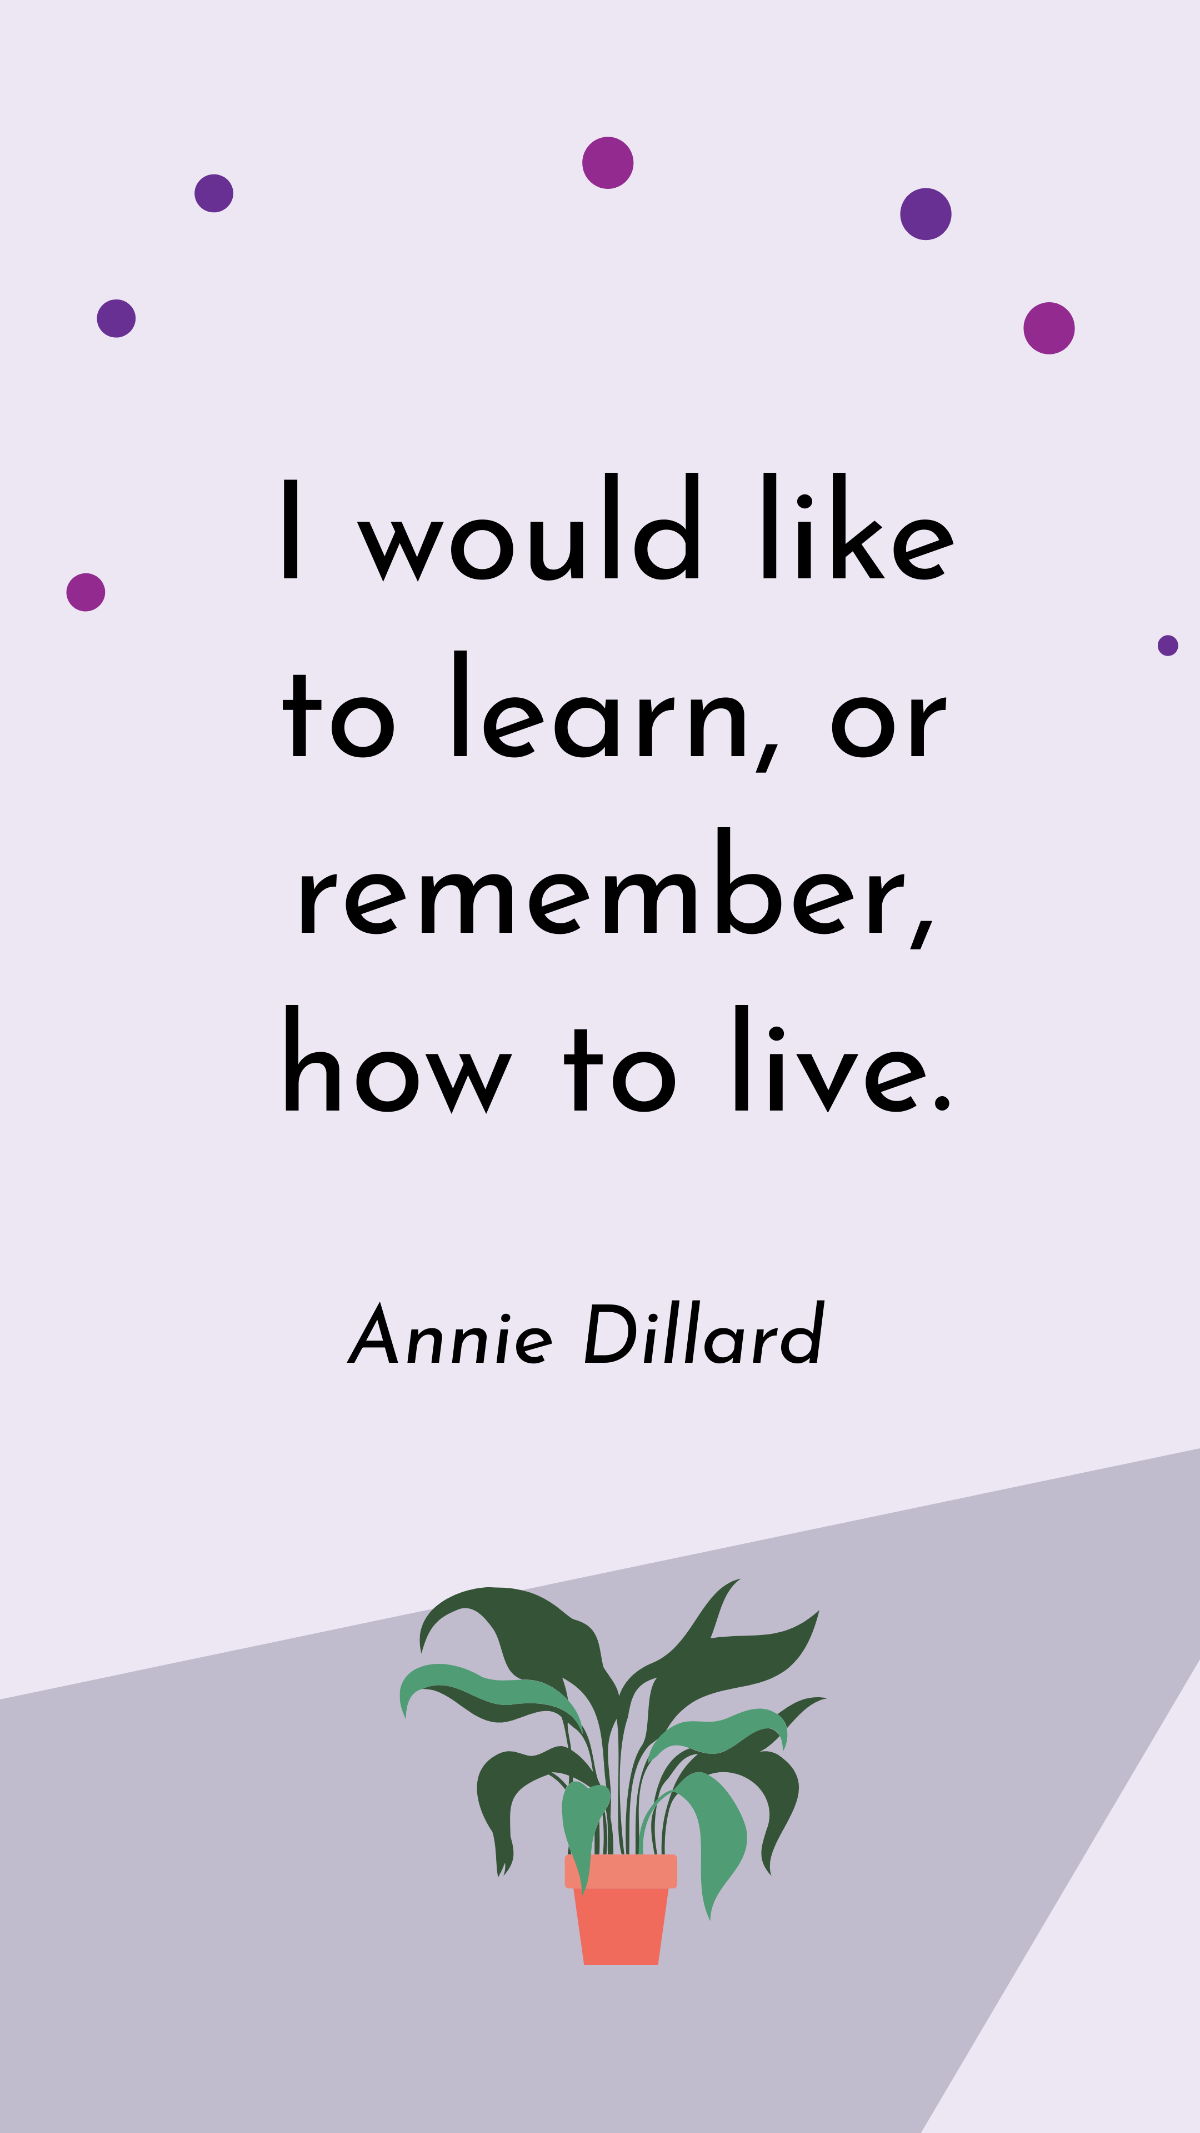 Annie Dillard - I would like to learn, or remember, how to live. Template